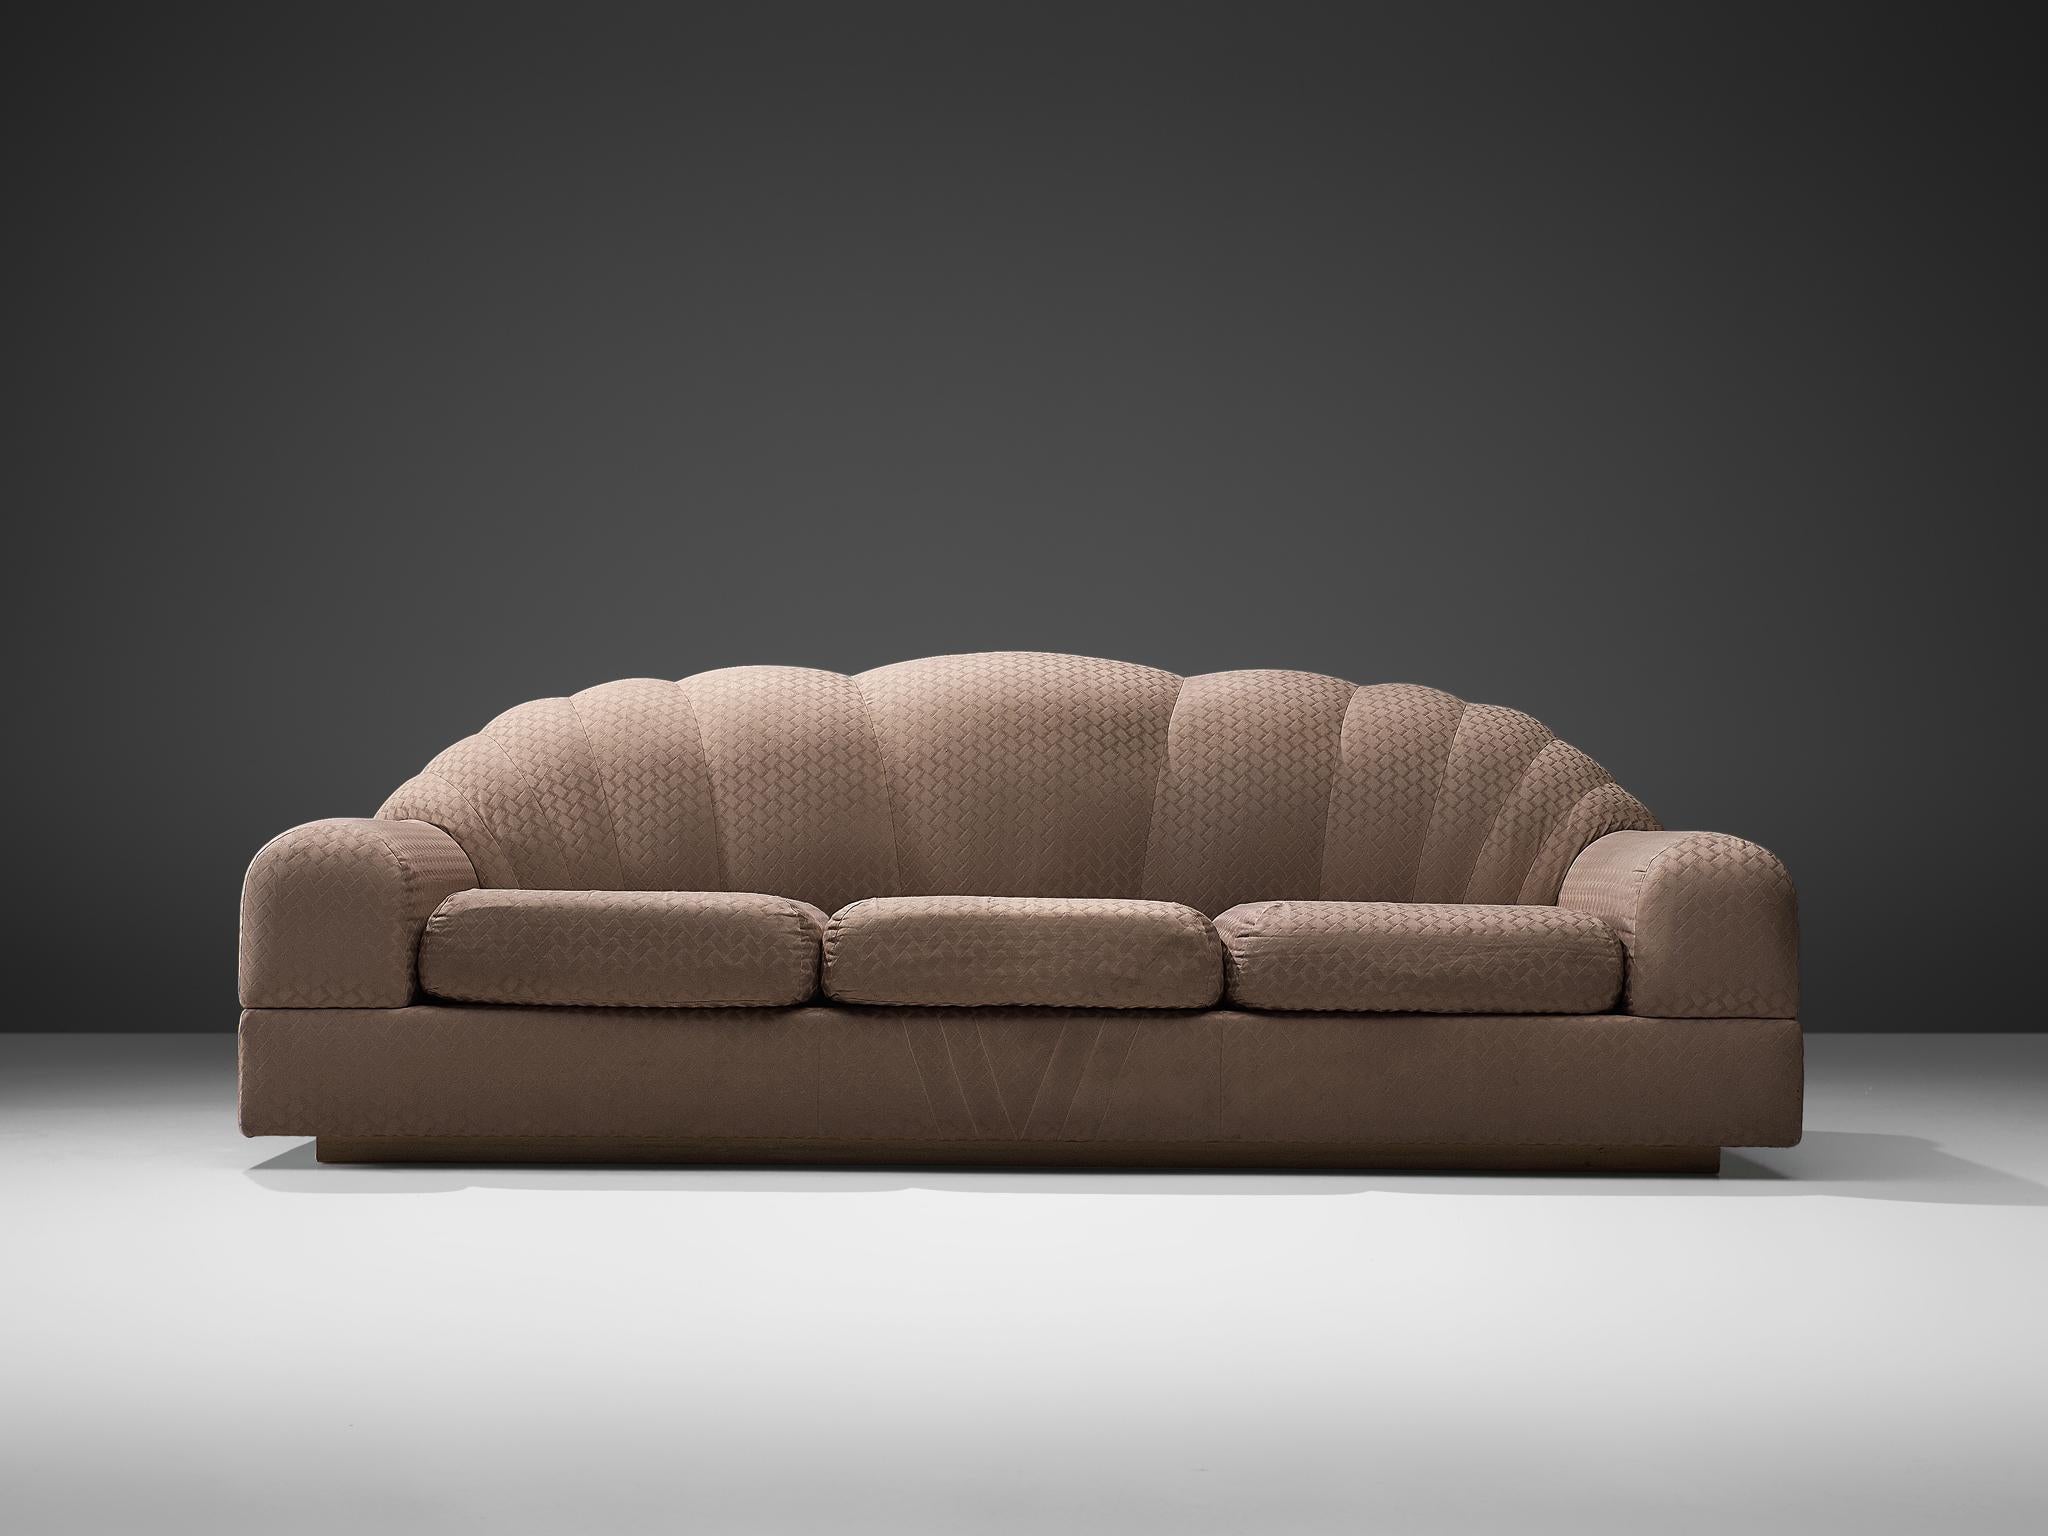 Alain Delon for Maison Jansen, sofa, fabric, France, 1970s

This ornate, grand comfortable three-seat sofa has a strong and playful design. The high, webbed back gives perfect support for the sitter. The thick seat with removable cushion creates a